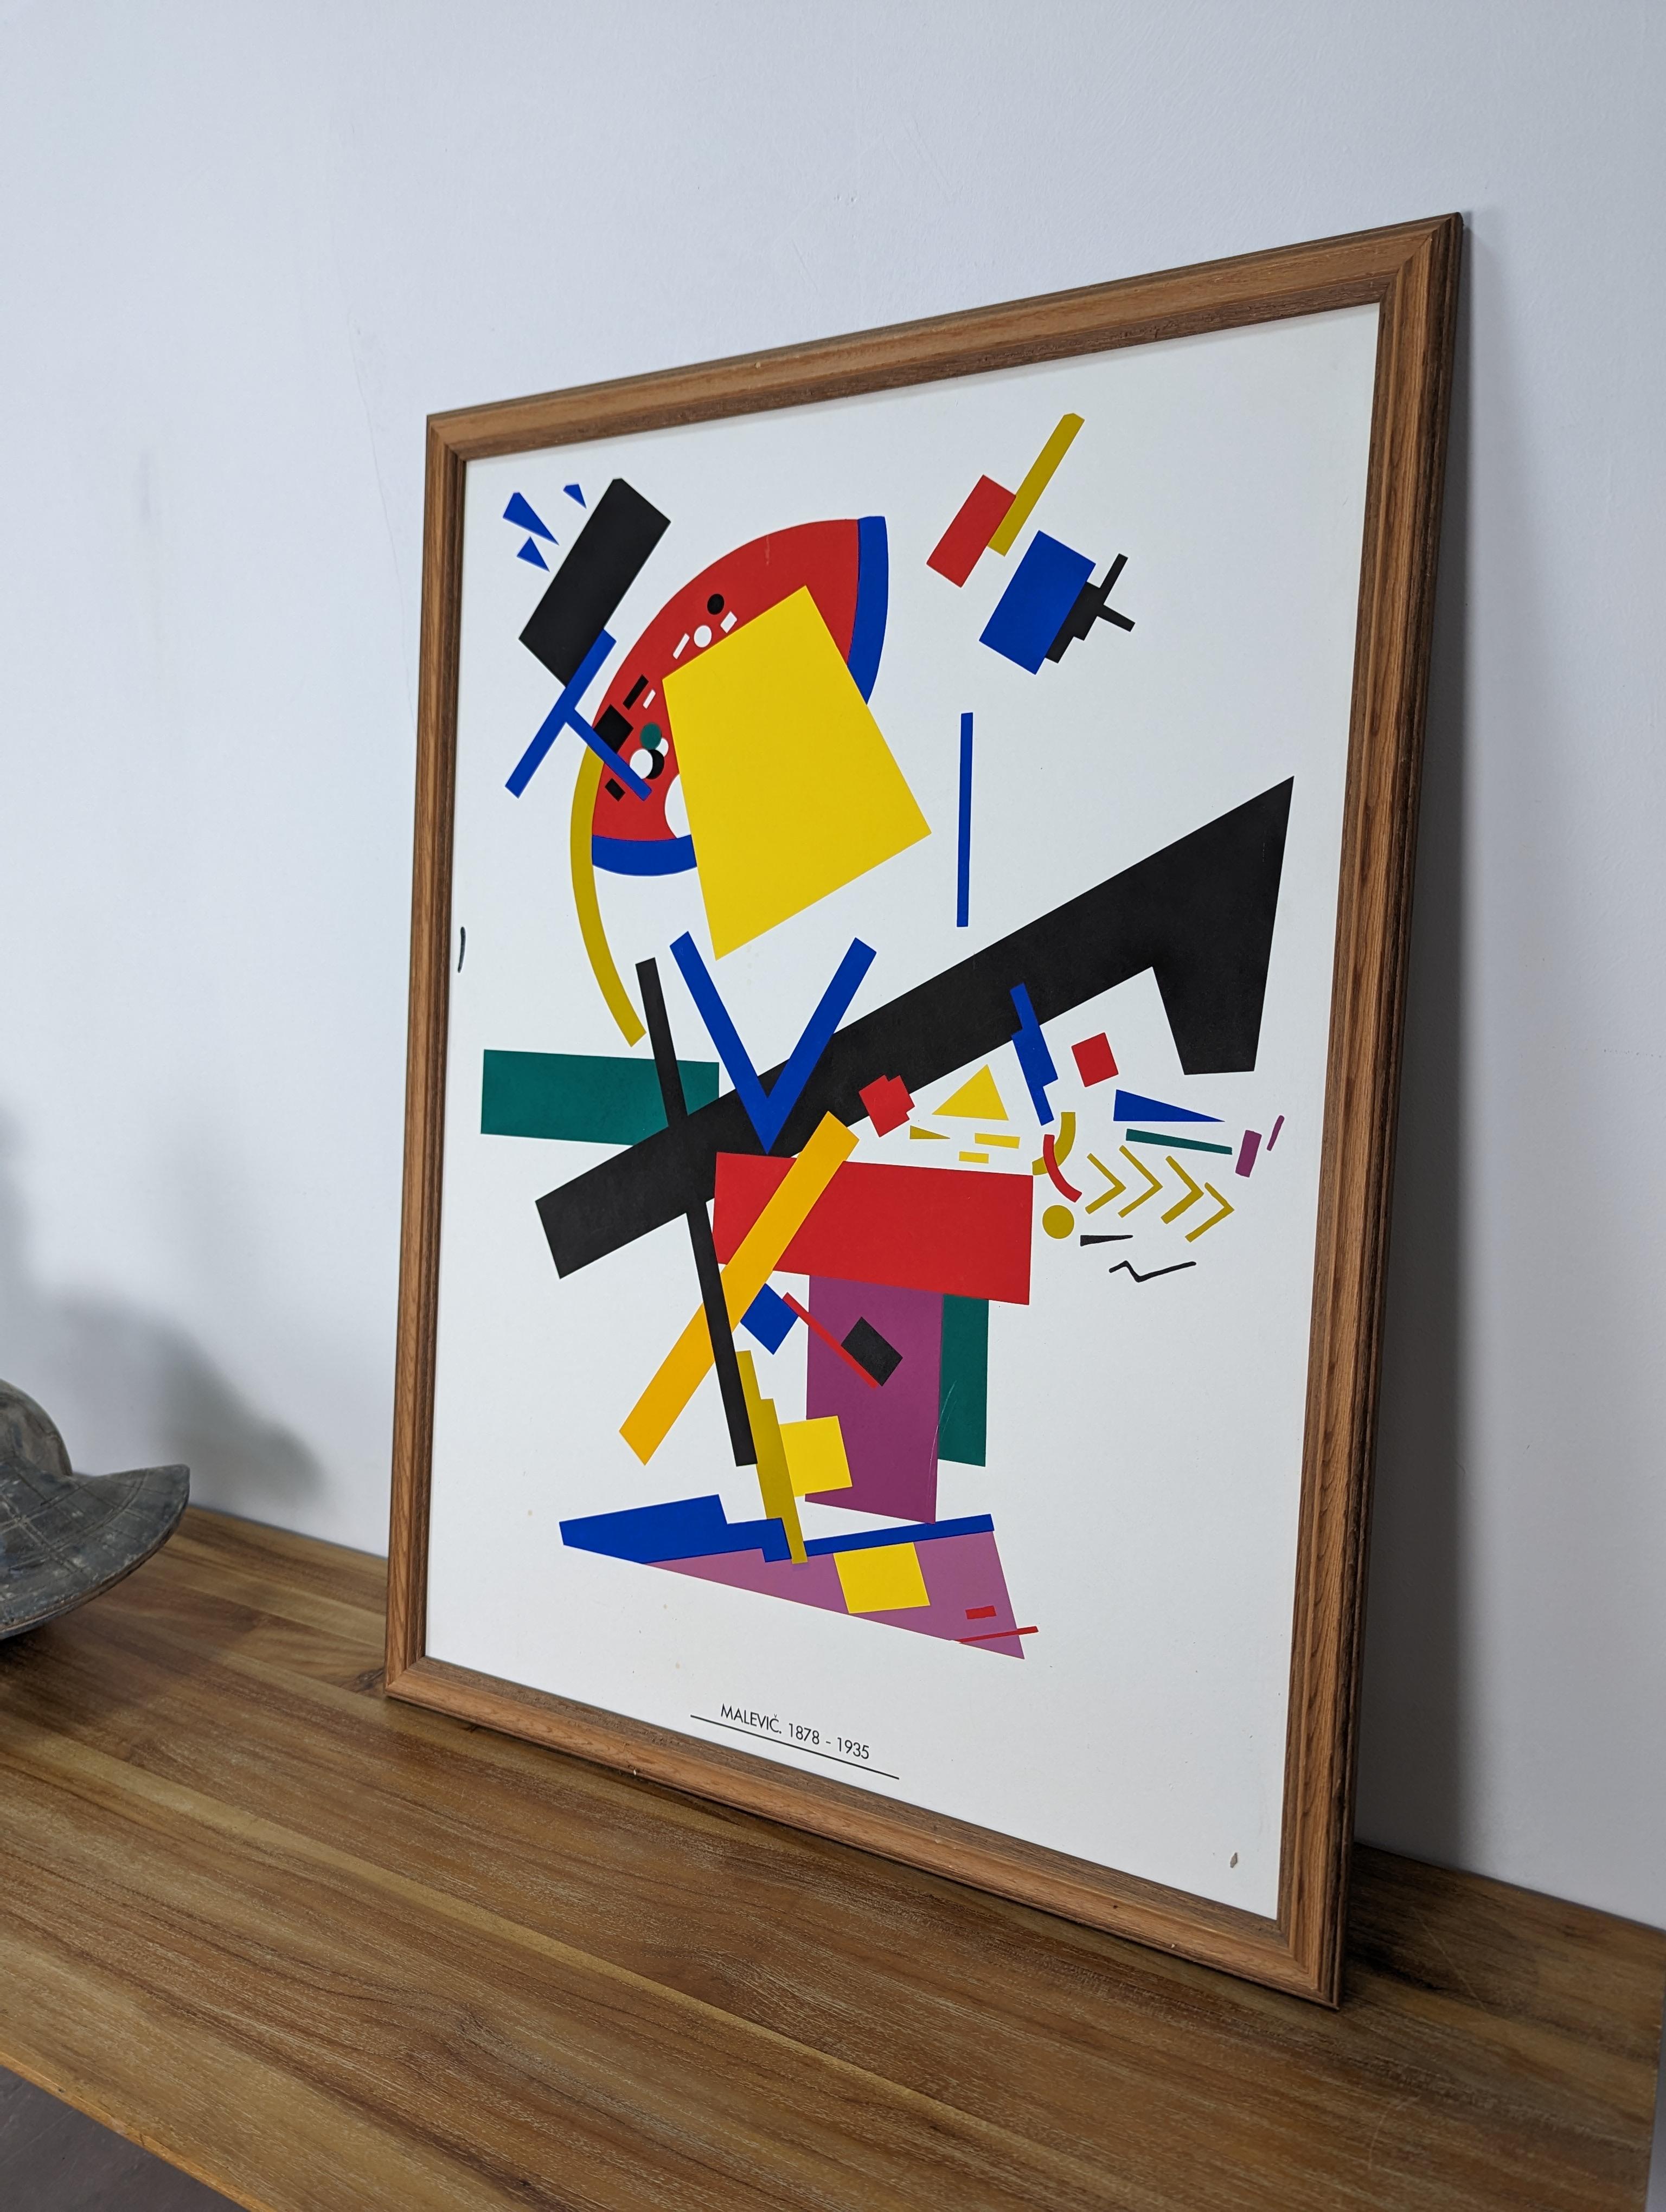 Beautiful quality lithograph being an original mid-century exhibition poster by the great artist Kazimir Malevich. Framed without glass.